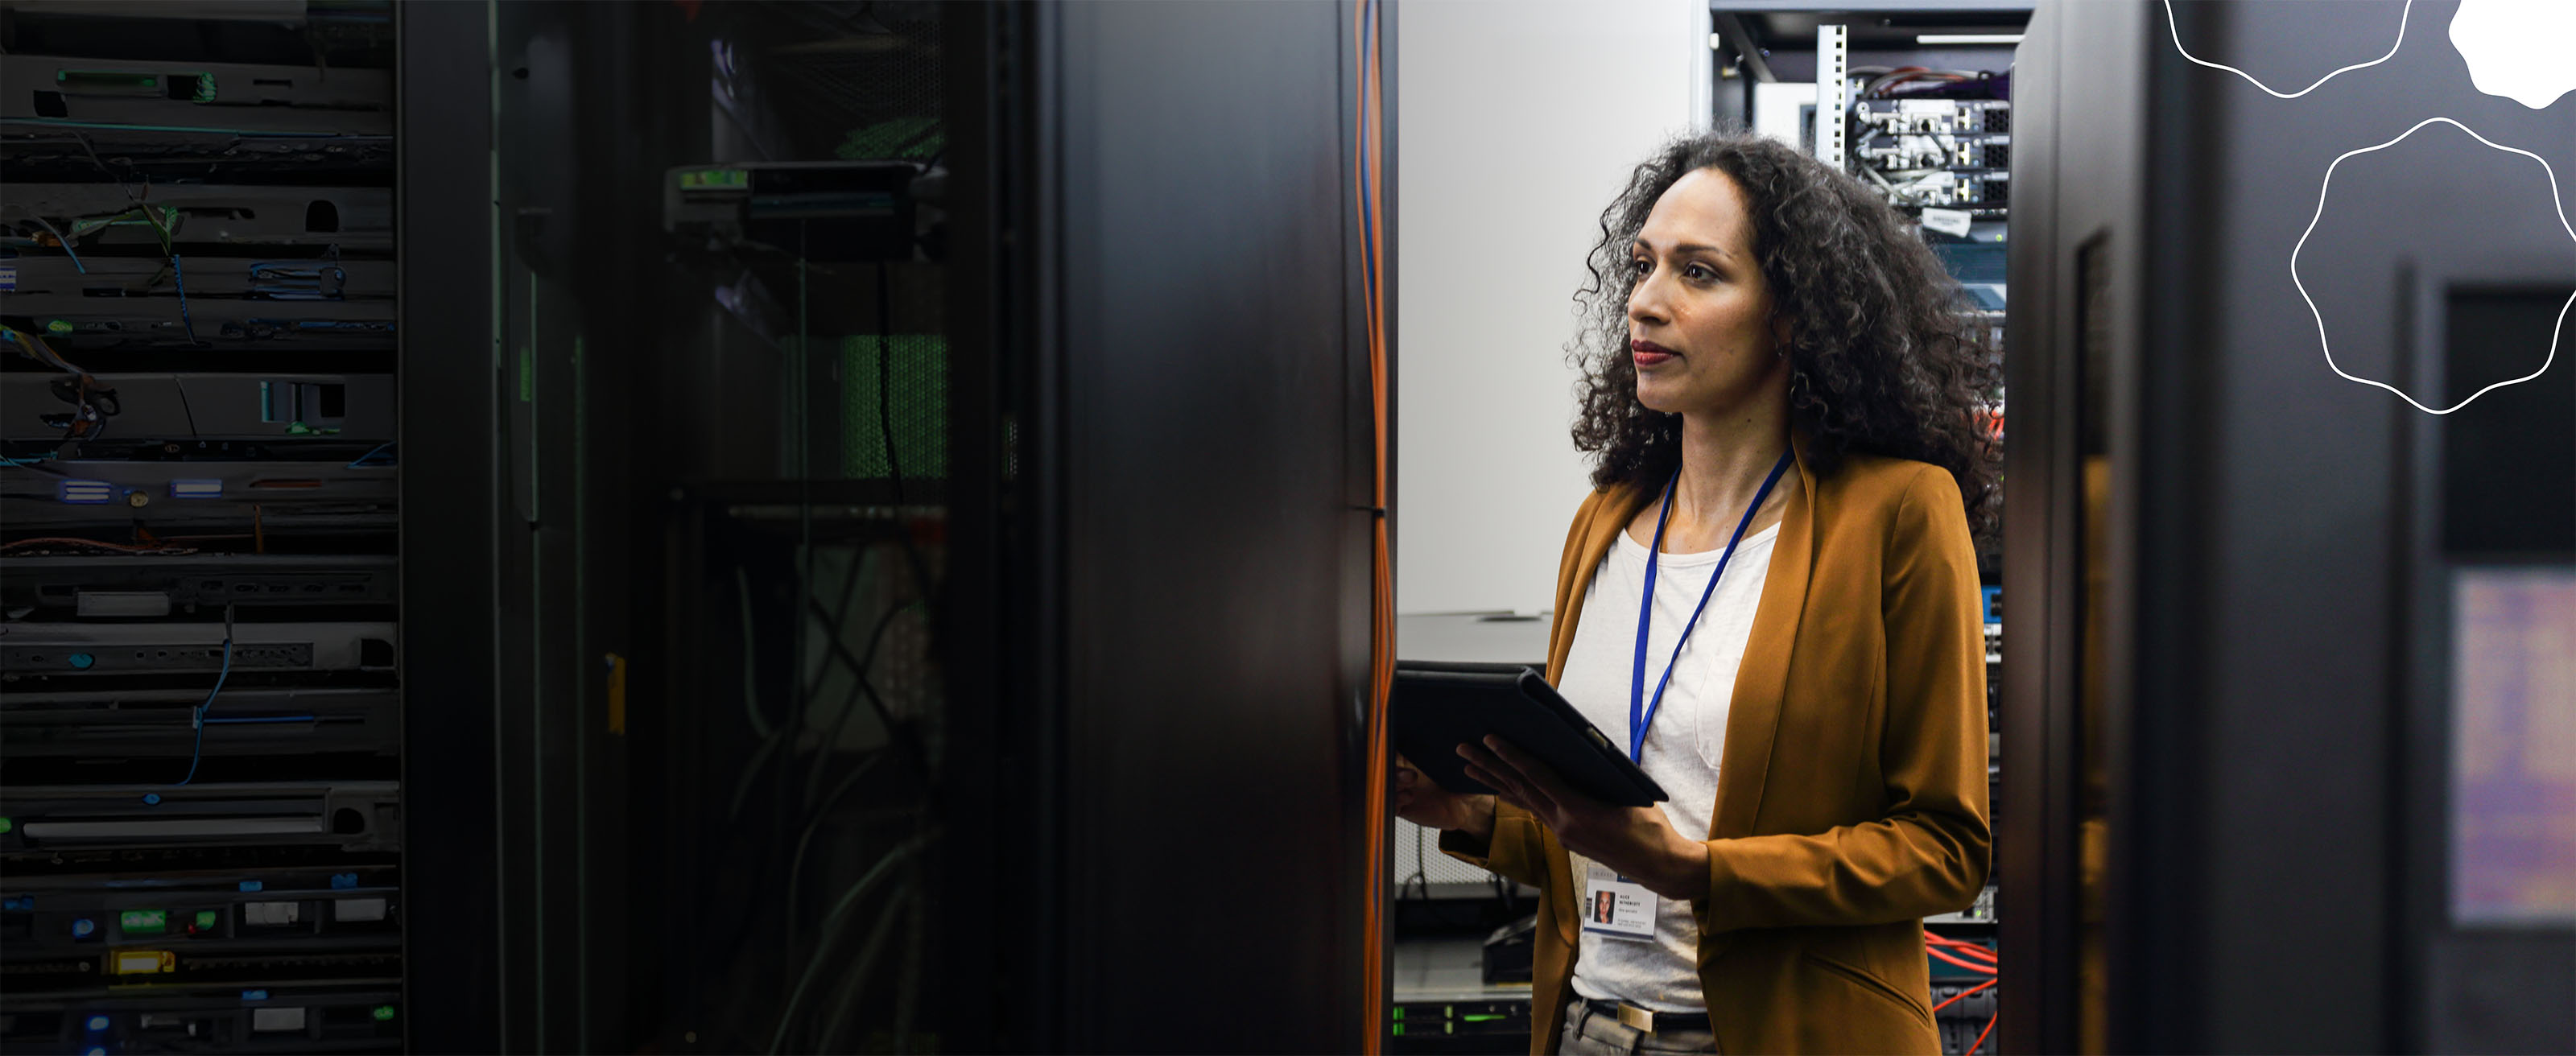 Prove you have the skills to diagnose, restore, repair, and replace critical Cisco networking and system devices at customer sites. Get certified with a Cisco Certified Technician (CCT) concentration in collaboration, data center, or routing and switching.